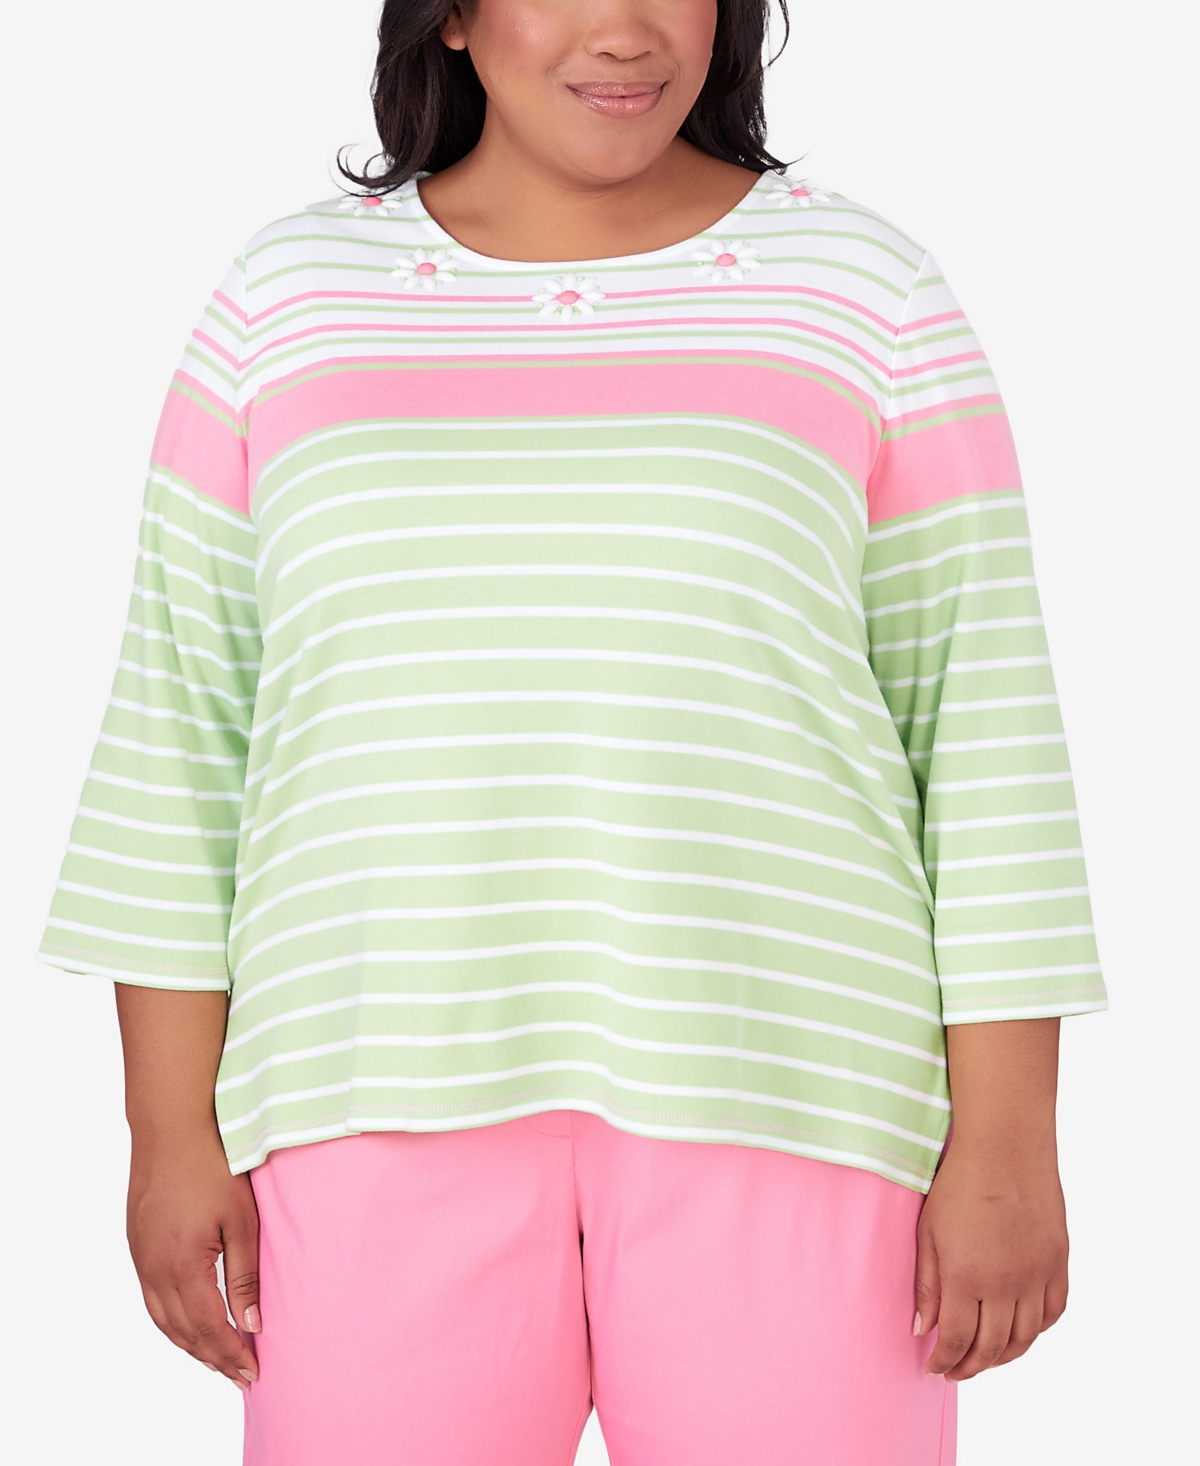 ALFRED DUNNER PLUS SIZE MIAMI BEACH STRIPED TOP WITH BEADED FLORAL DETAILS